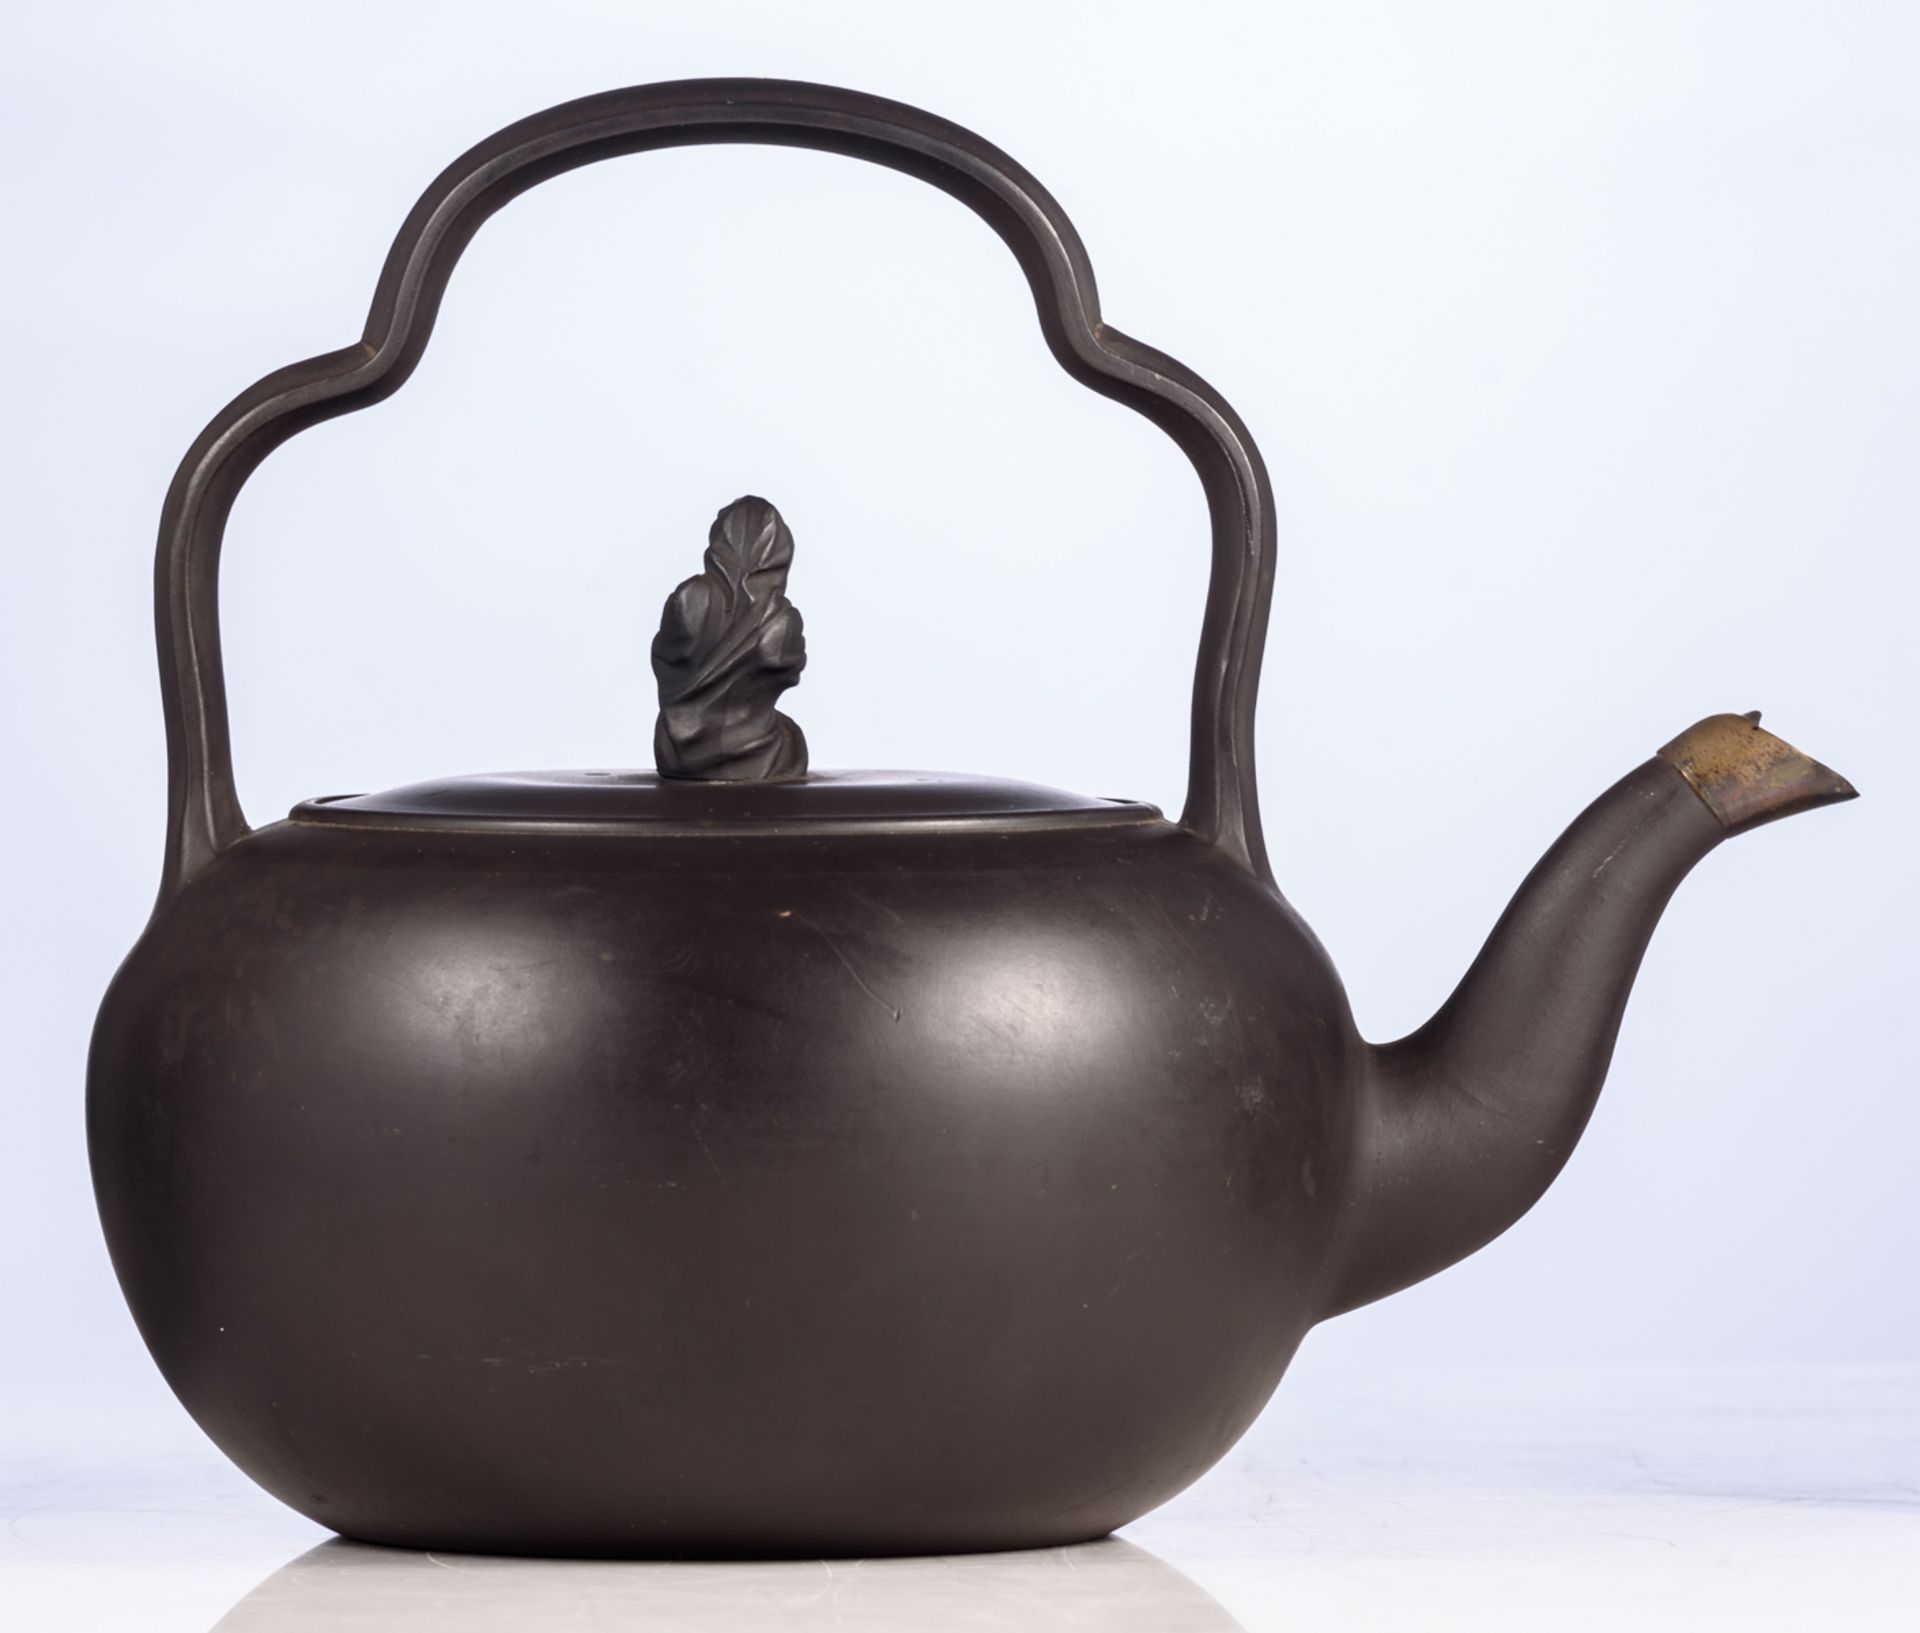 An English black basalt teakettle with a lobed bail handle, a Sybil knop and a silver cap on the - Image 4 of 8